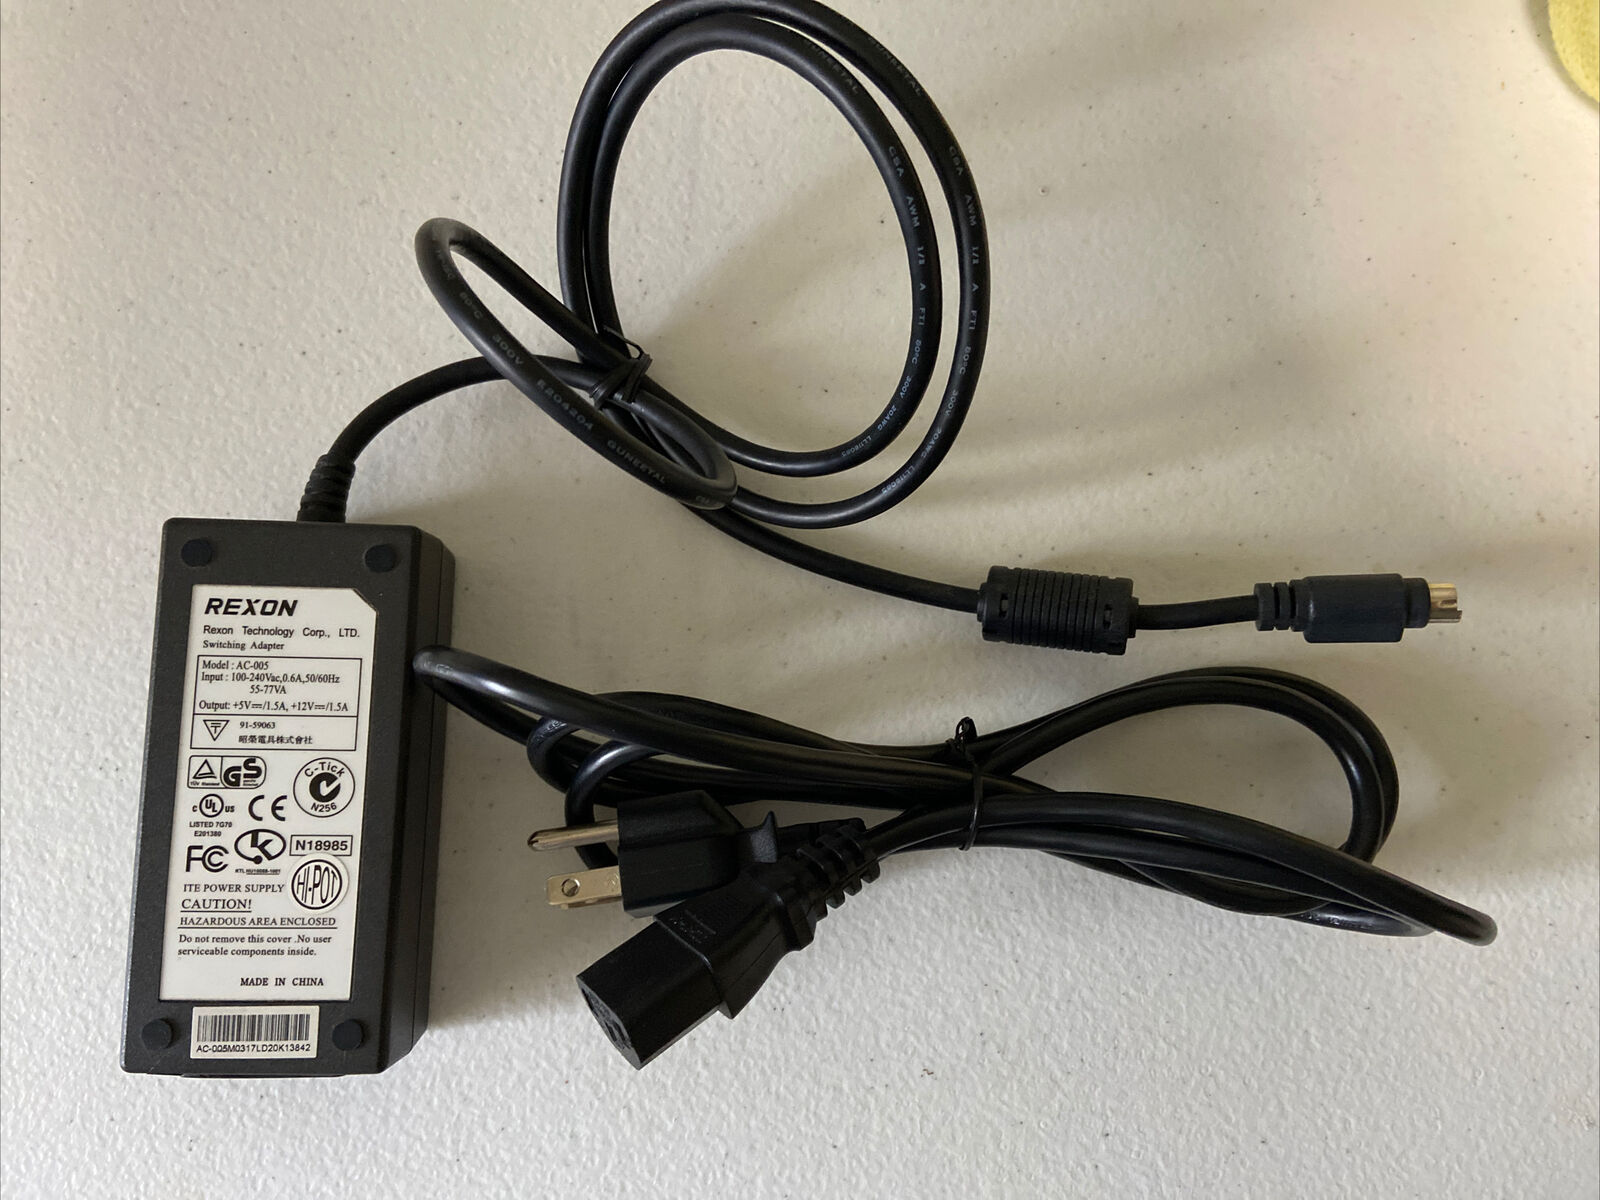 Rexon AC-005 Switching Adapter Output 5V 12V 1.5A Power Supply Transformer A6 Connection Split/Duplication: 1:2 Type: